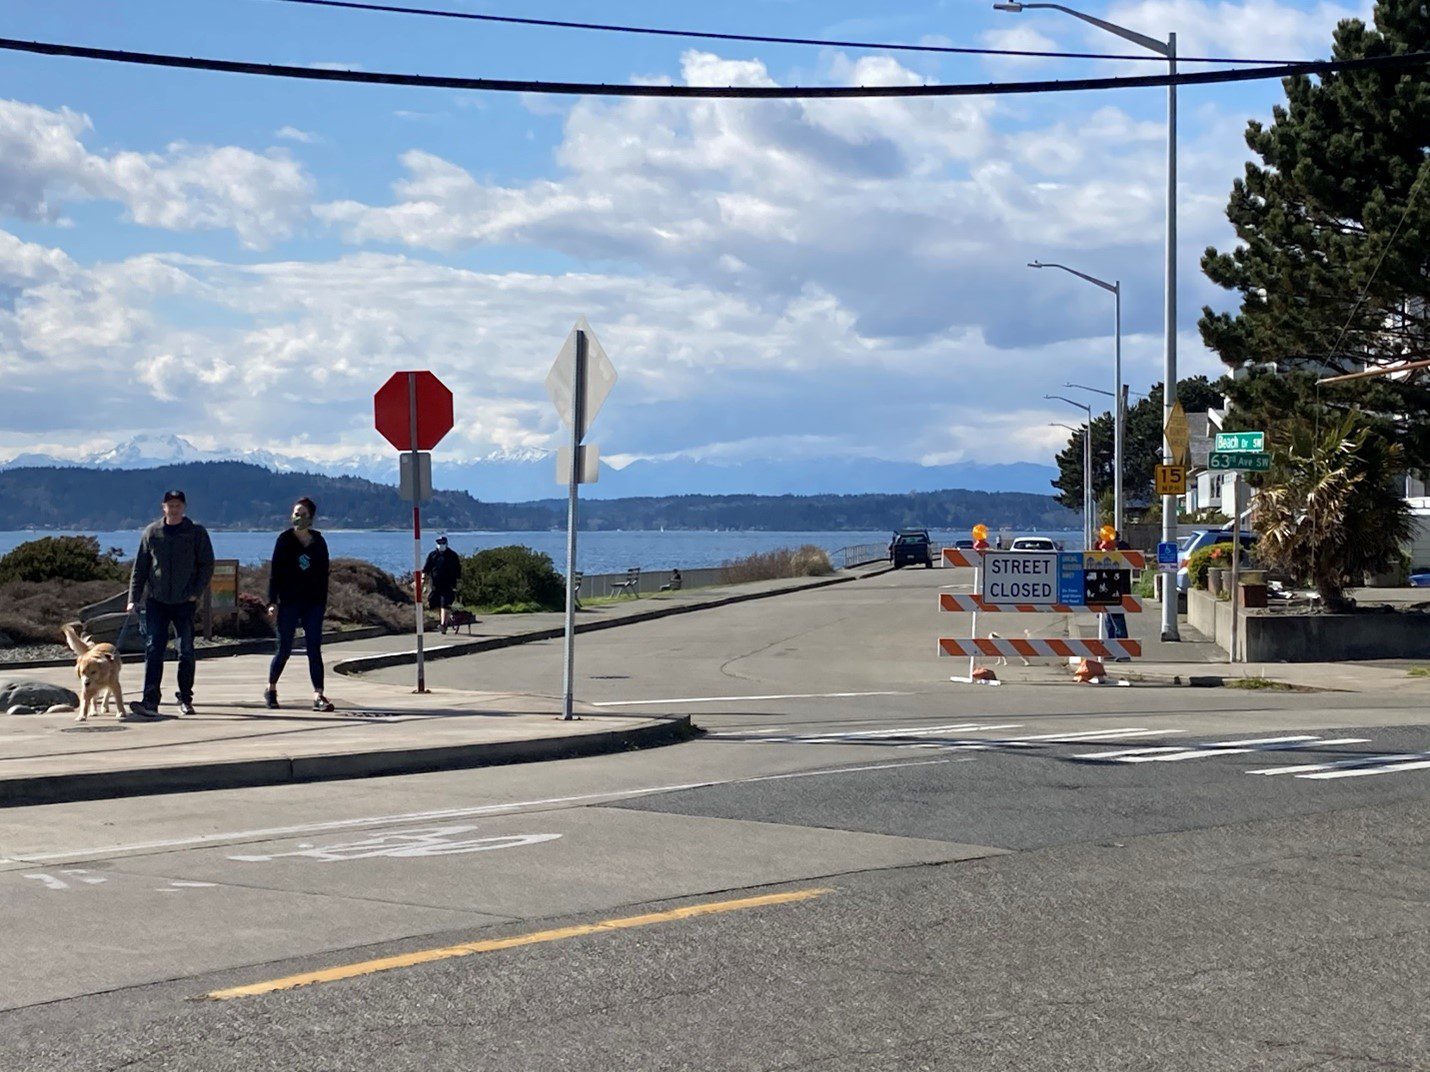 People walk along the entrance to the Alki Point Healthy Street on a sunny and cloudy day.